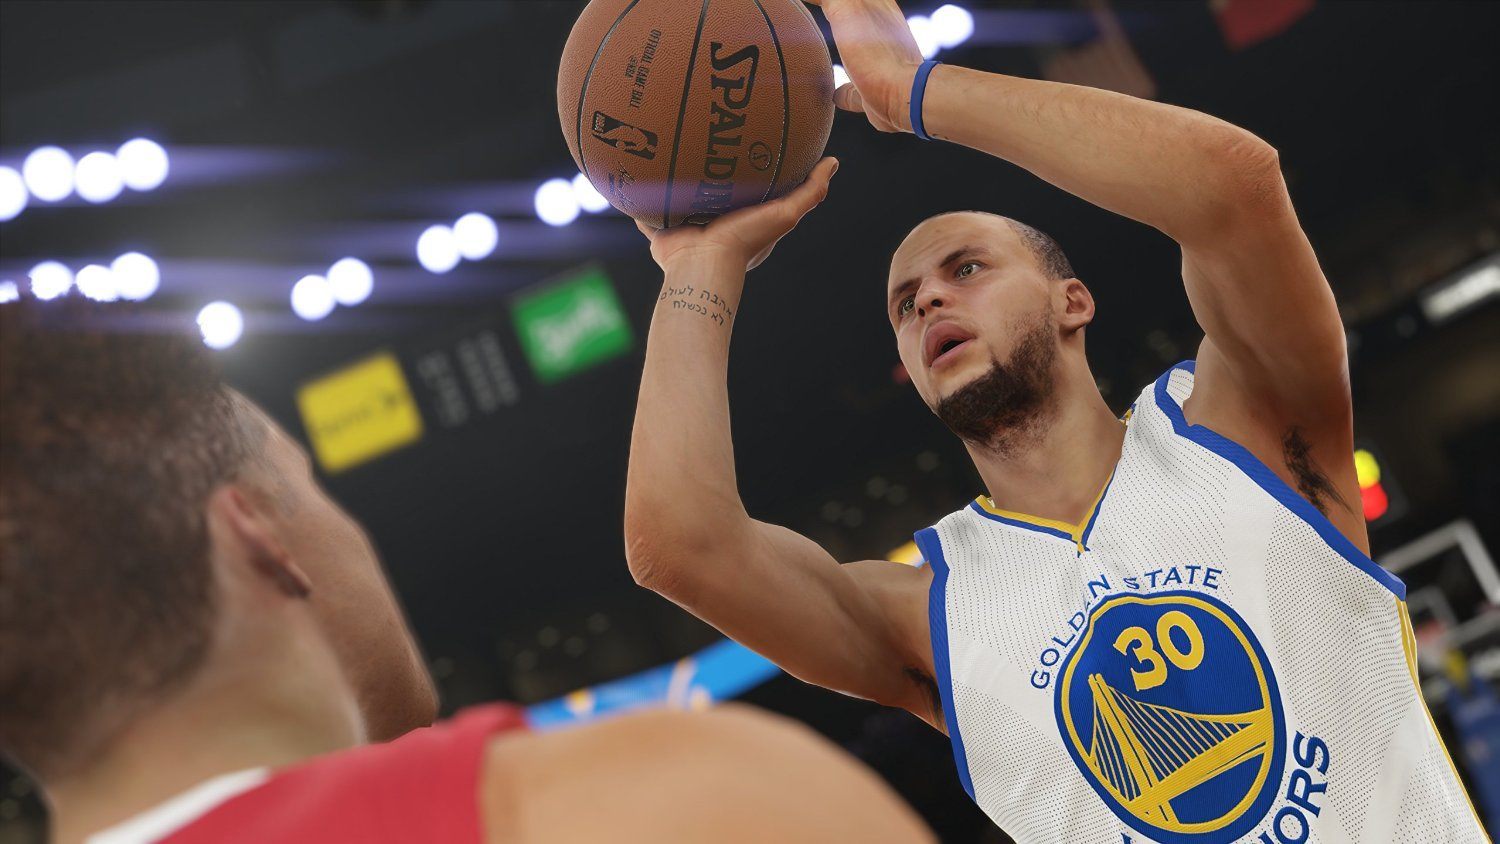 Check out these NBA 2K15 release details.